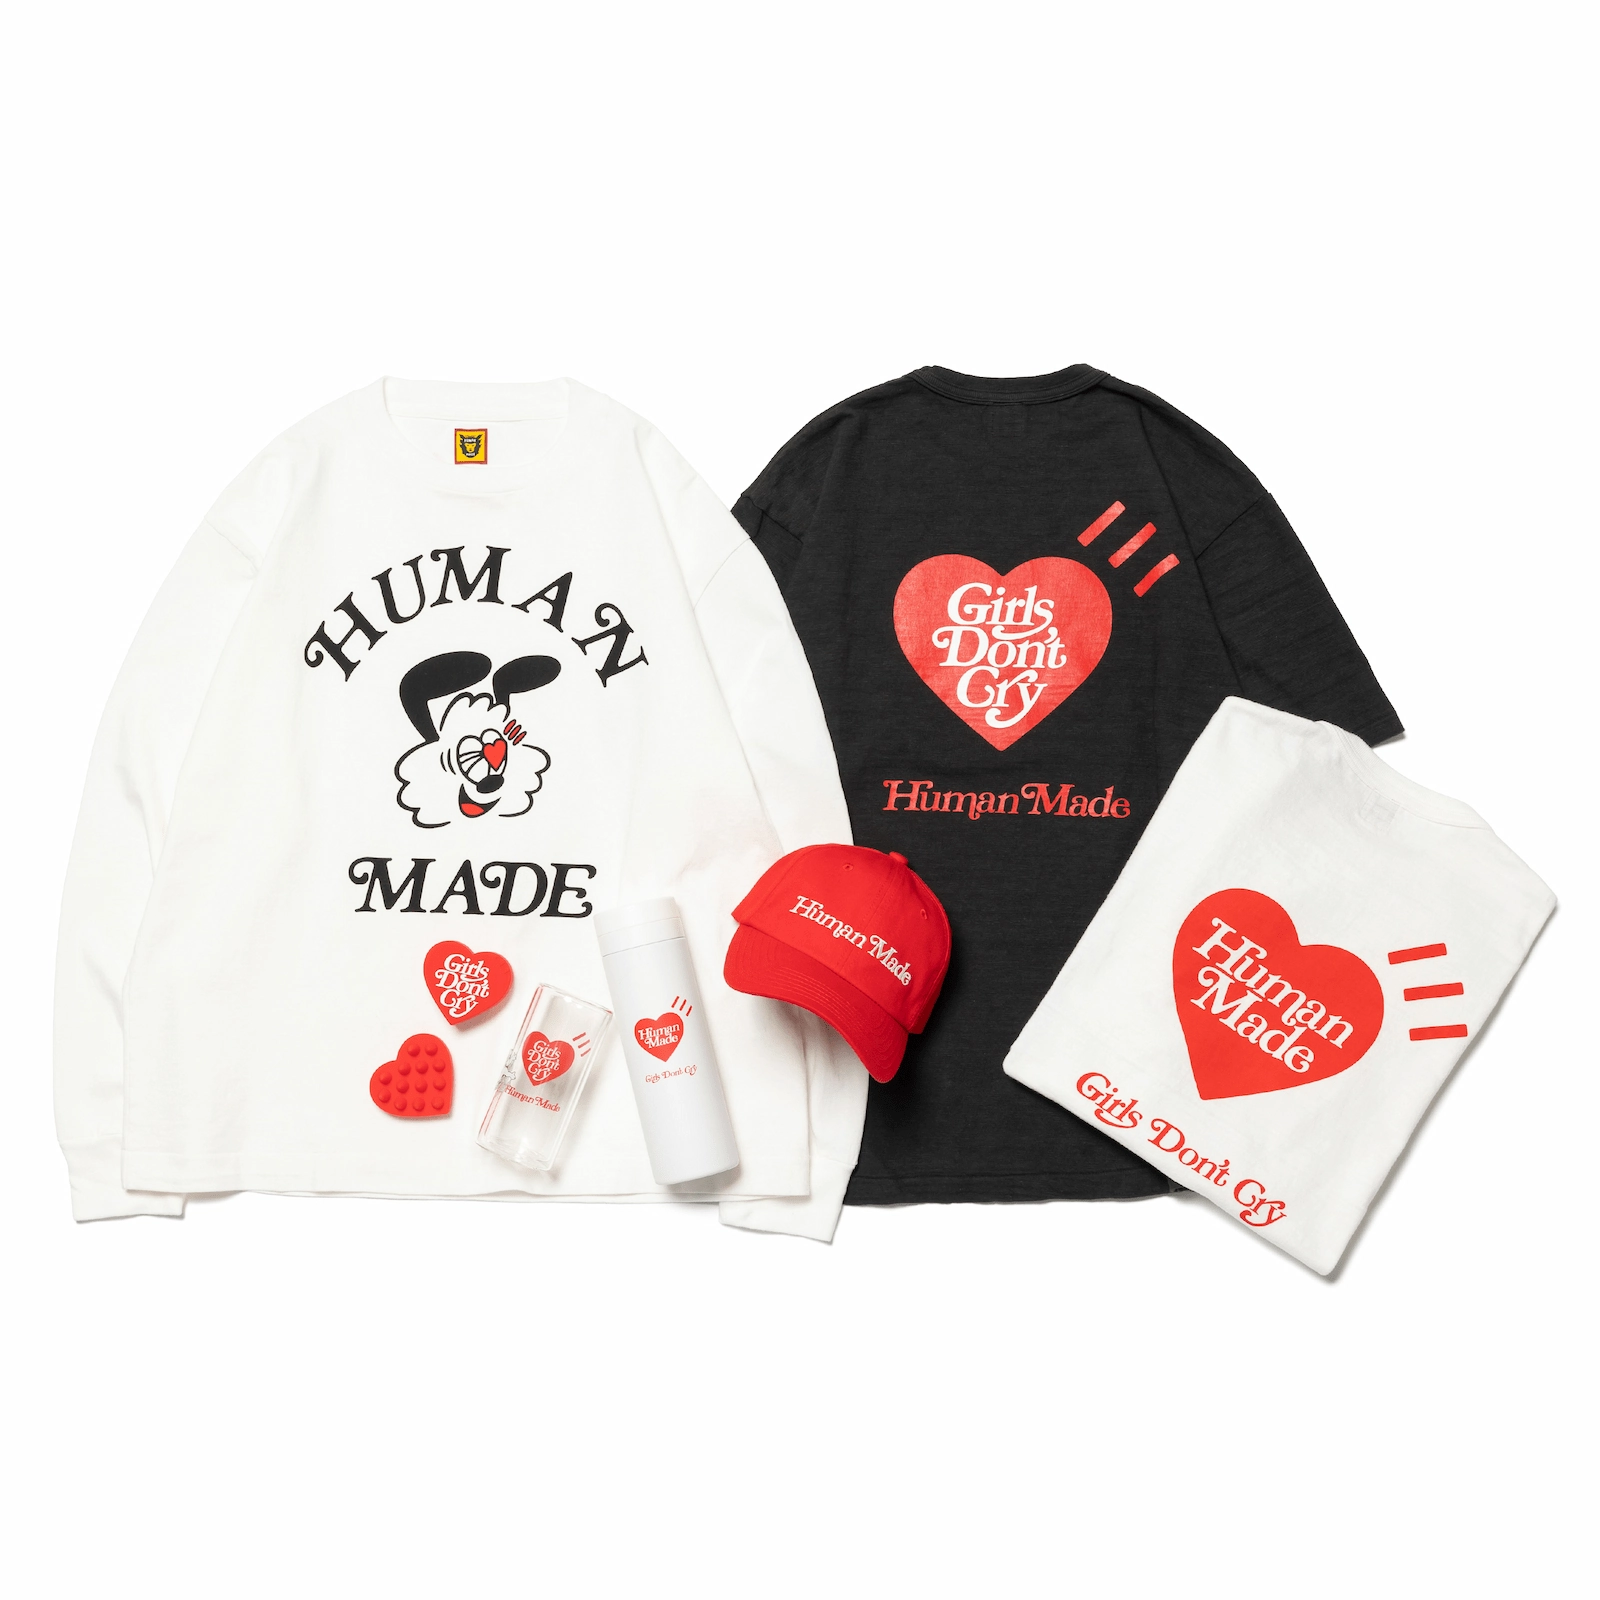 HUMAN MADE - Season 25 Valentine’s Day Capsule Collection Release